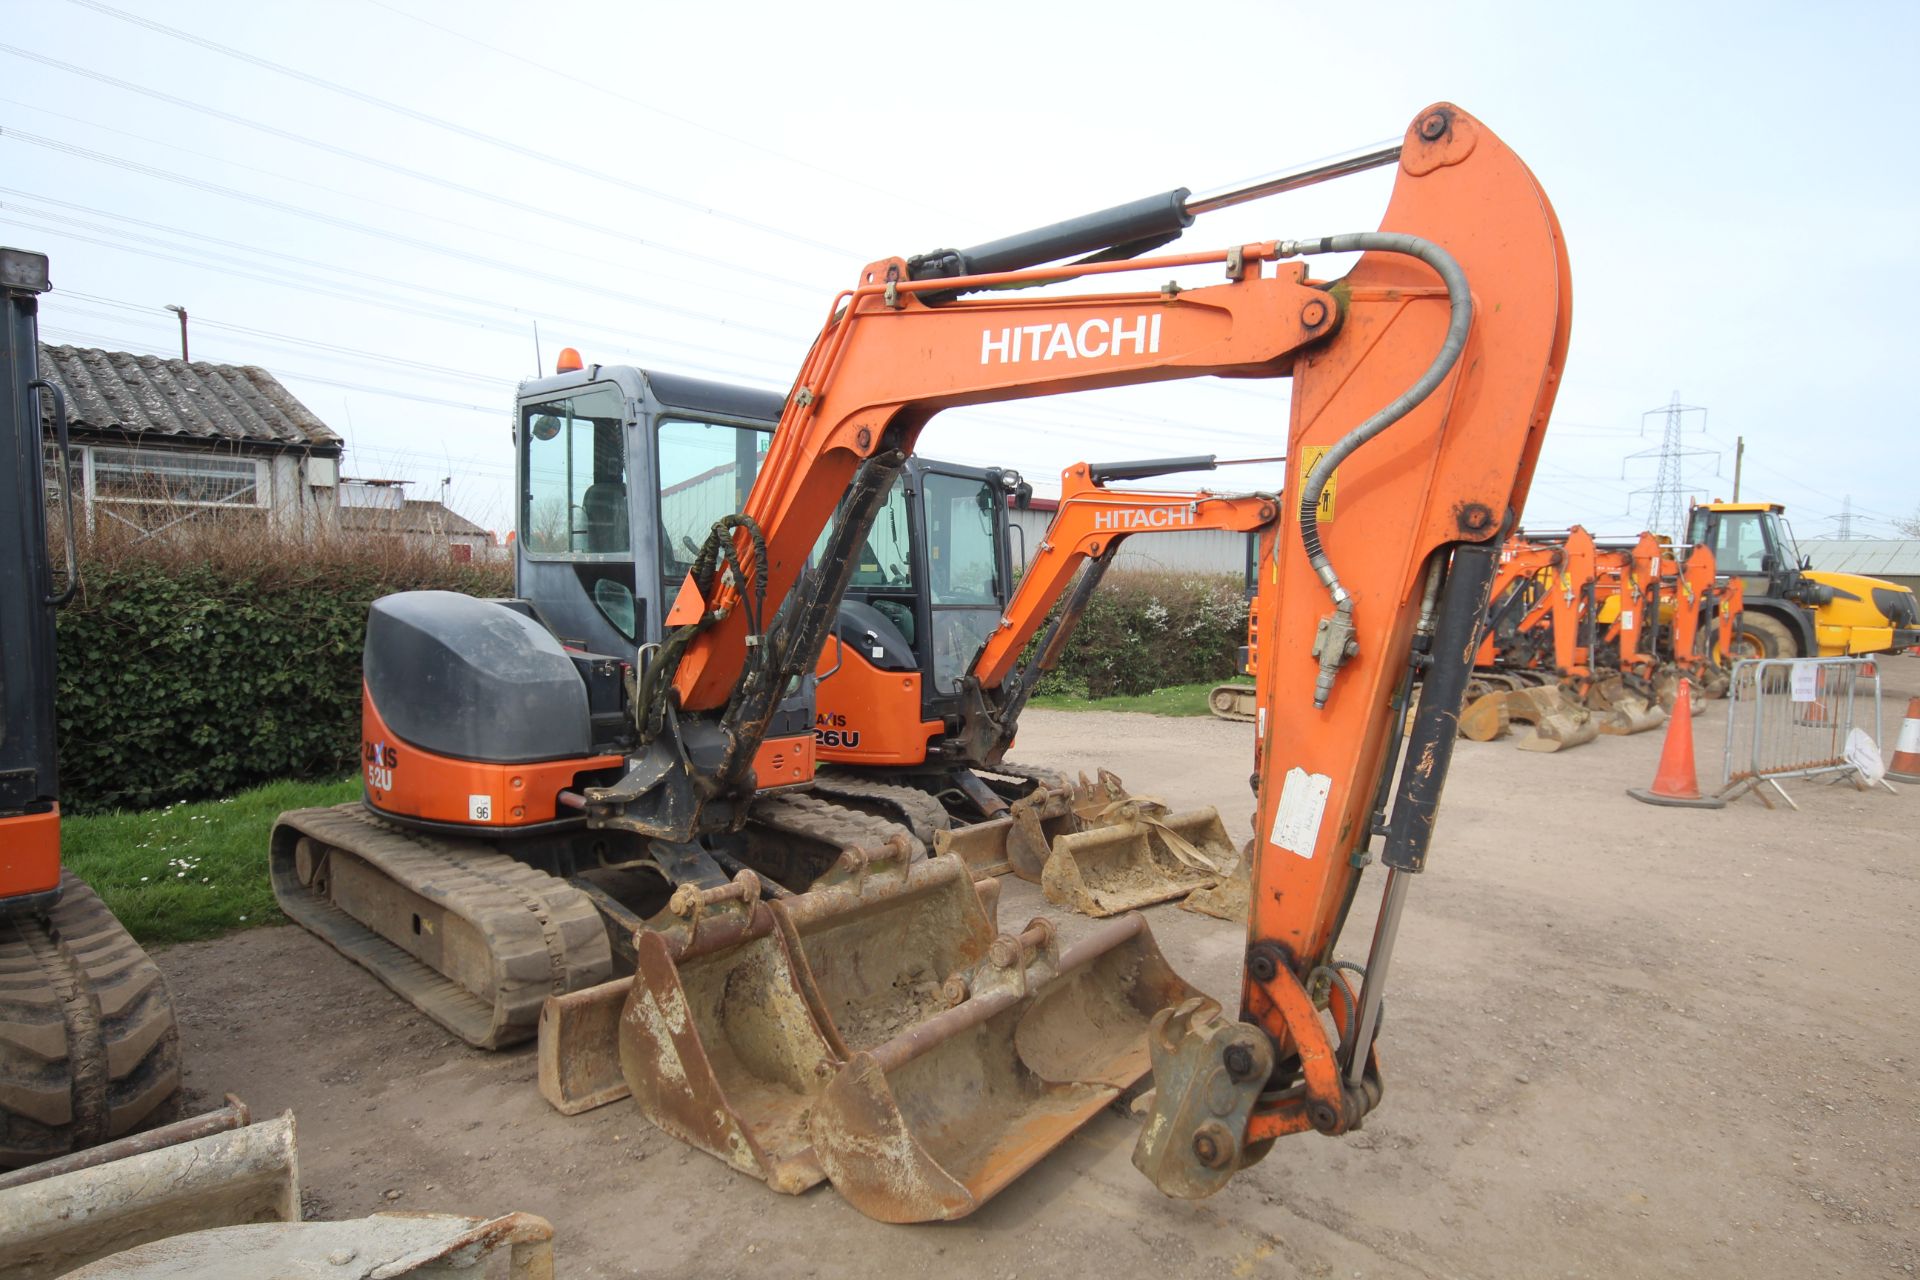 Hitachi Z-Axis 52U-3 CLR 5T rubber track excavator. 2013. 5,066 hours. Serial number HCM